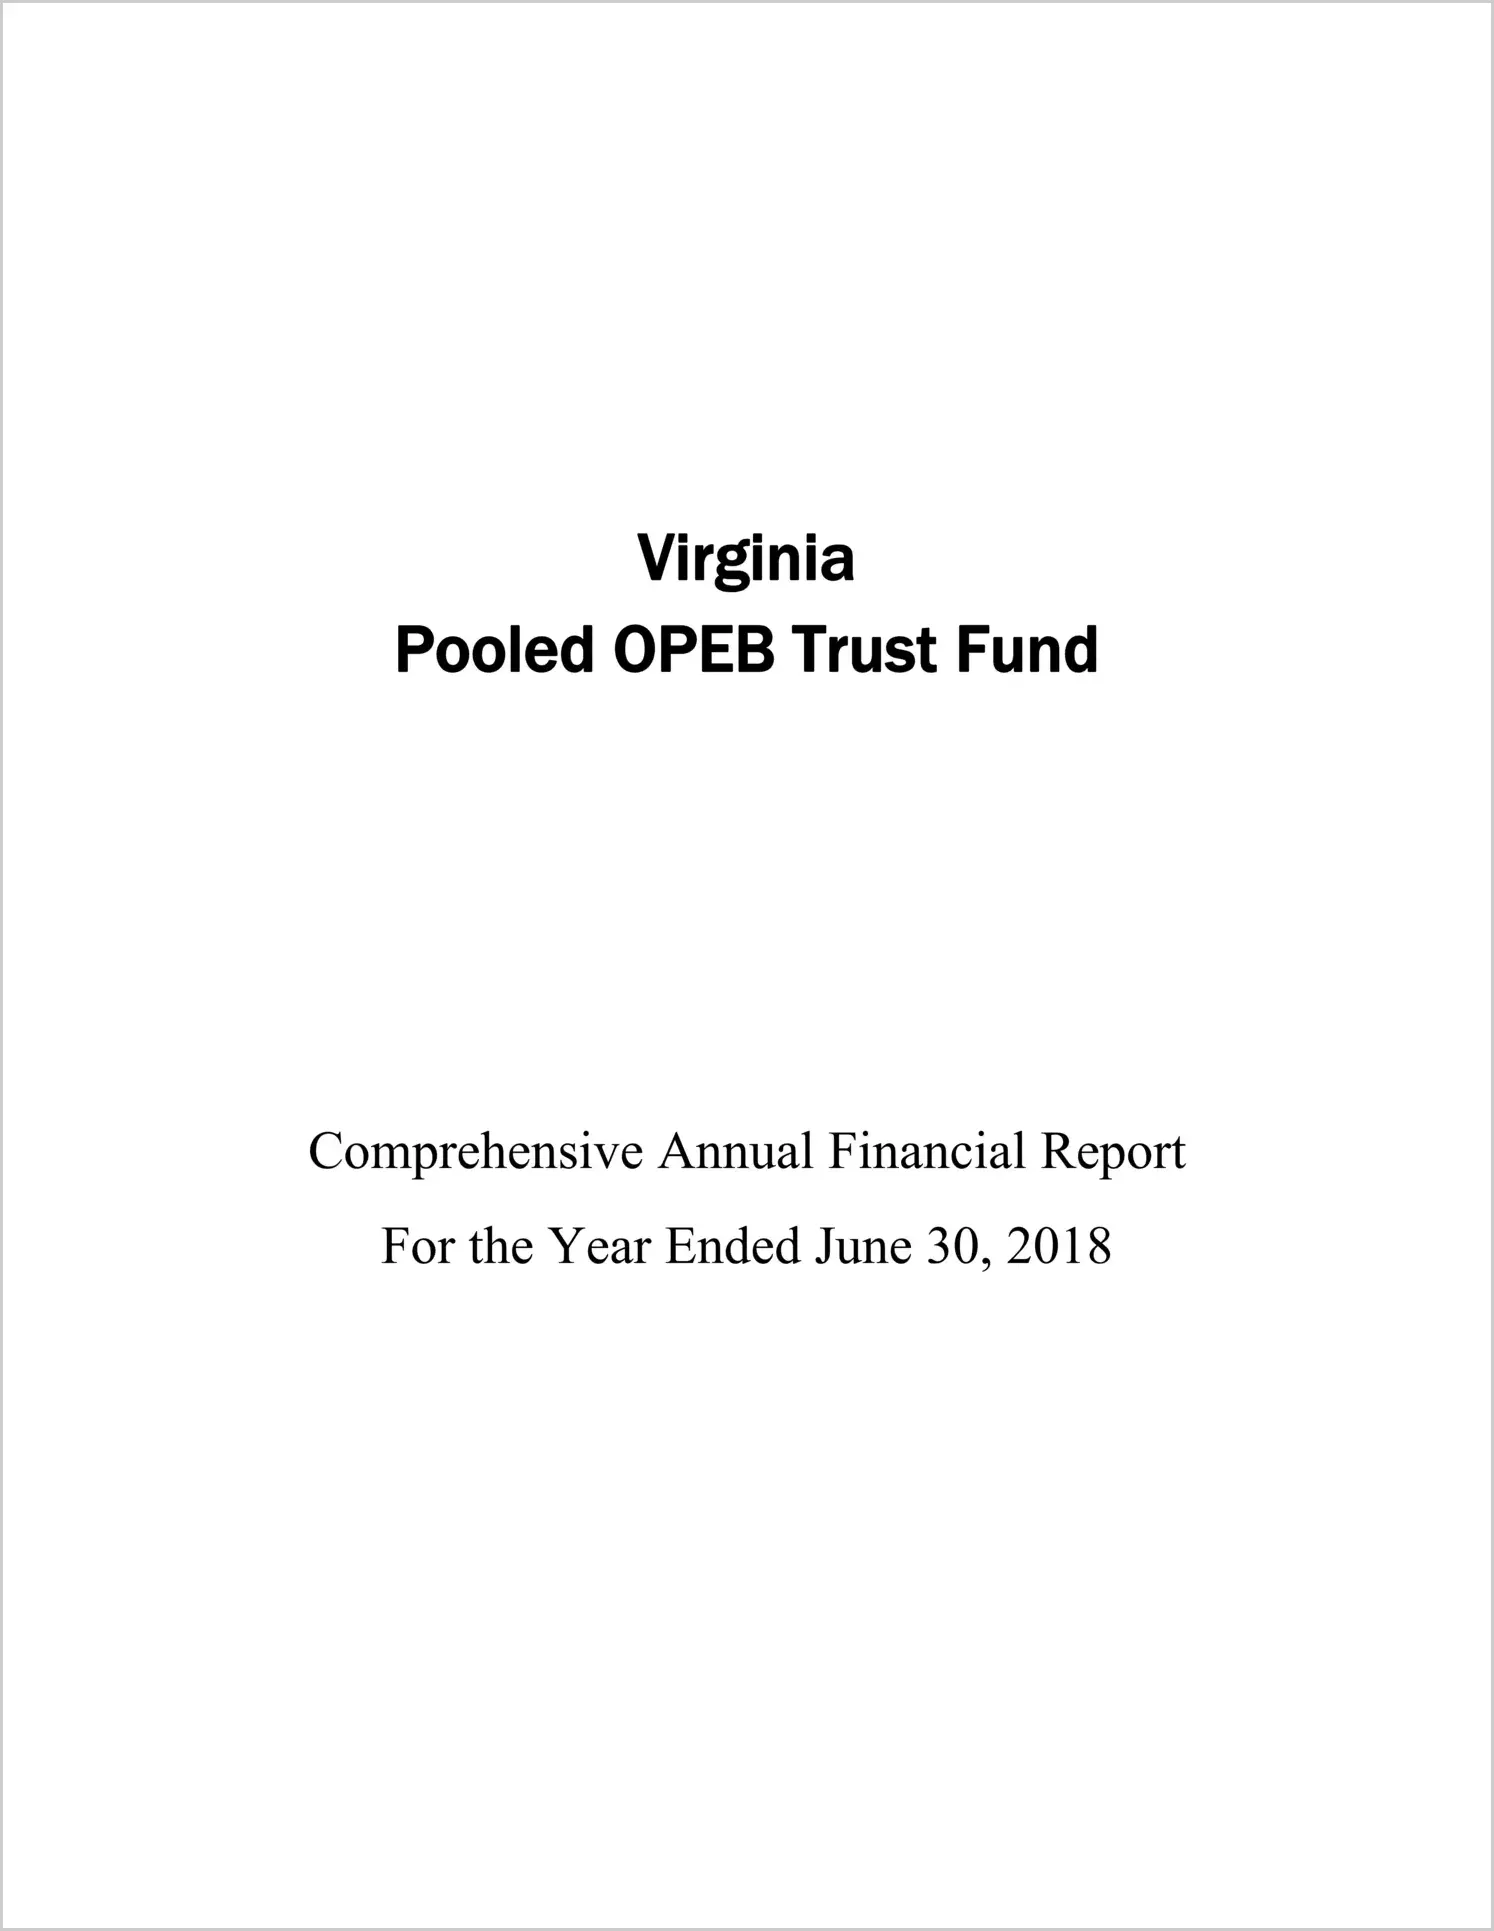 2018 ABC/Other Annual Financial Report  for Virginia Pooled OPEB Trust Fund